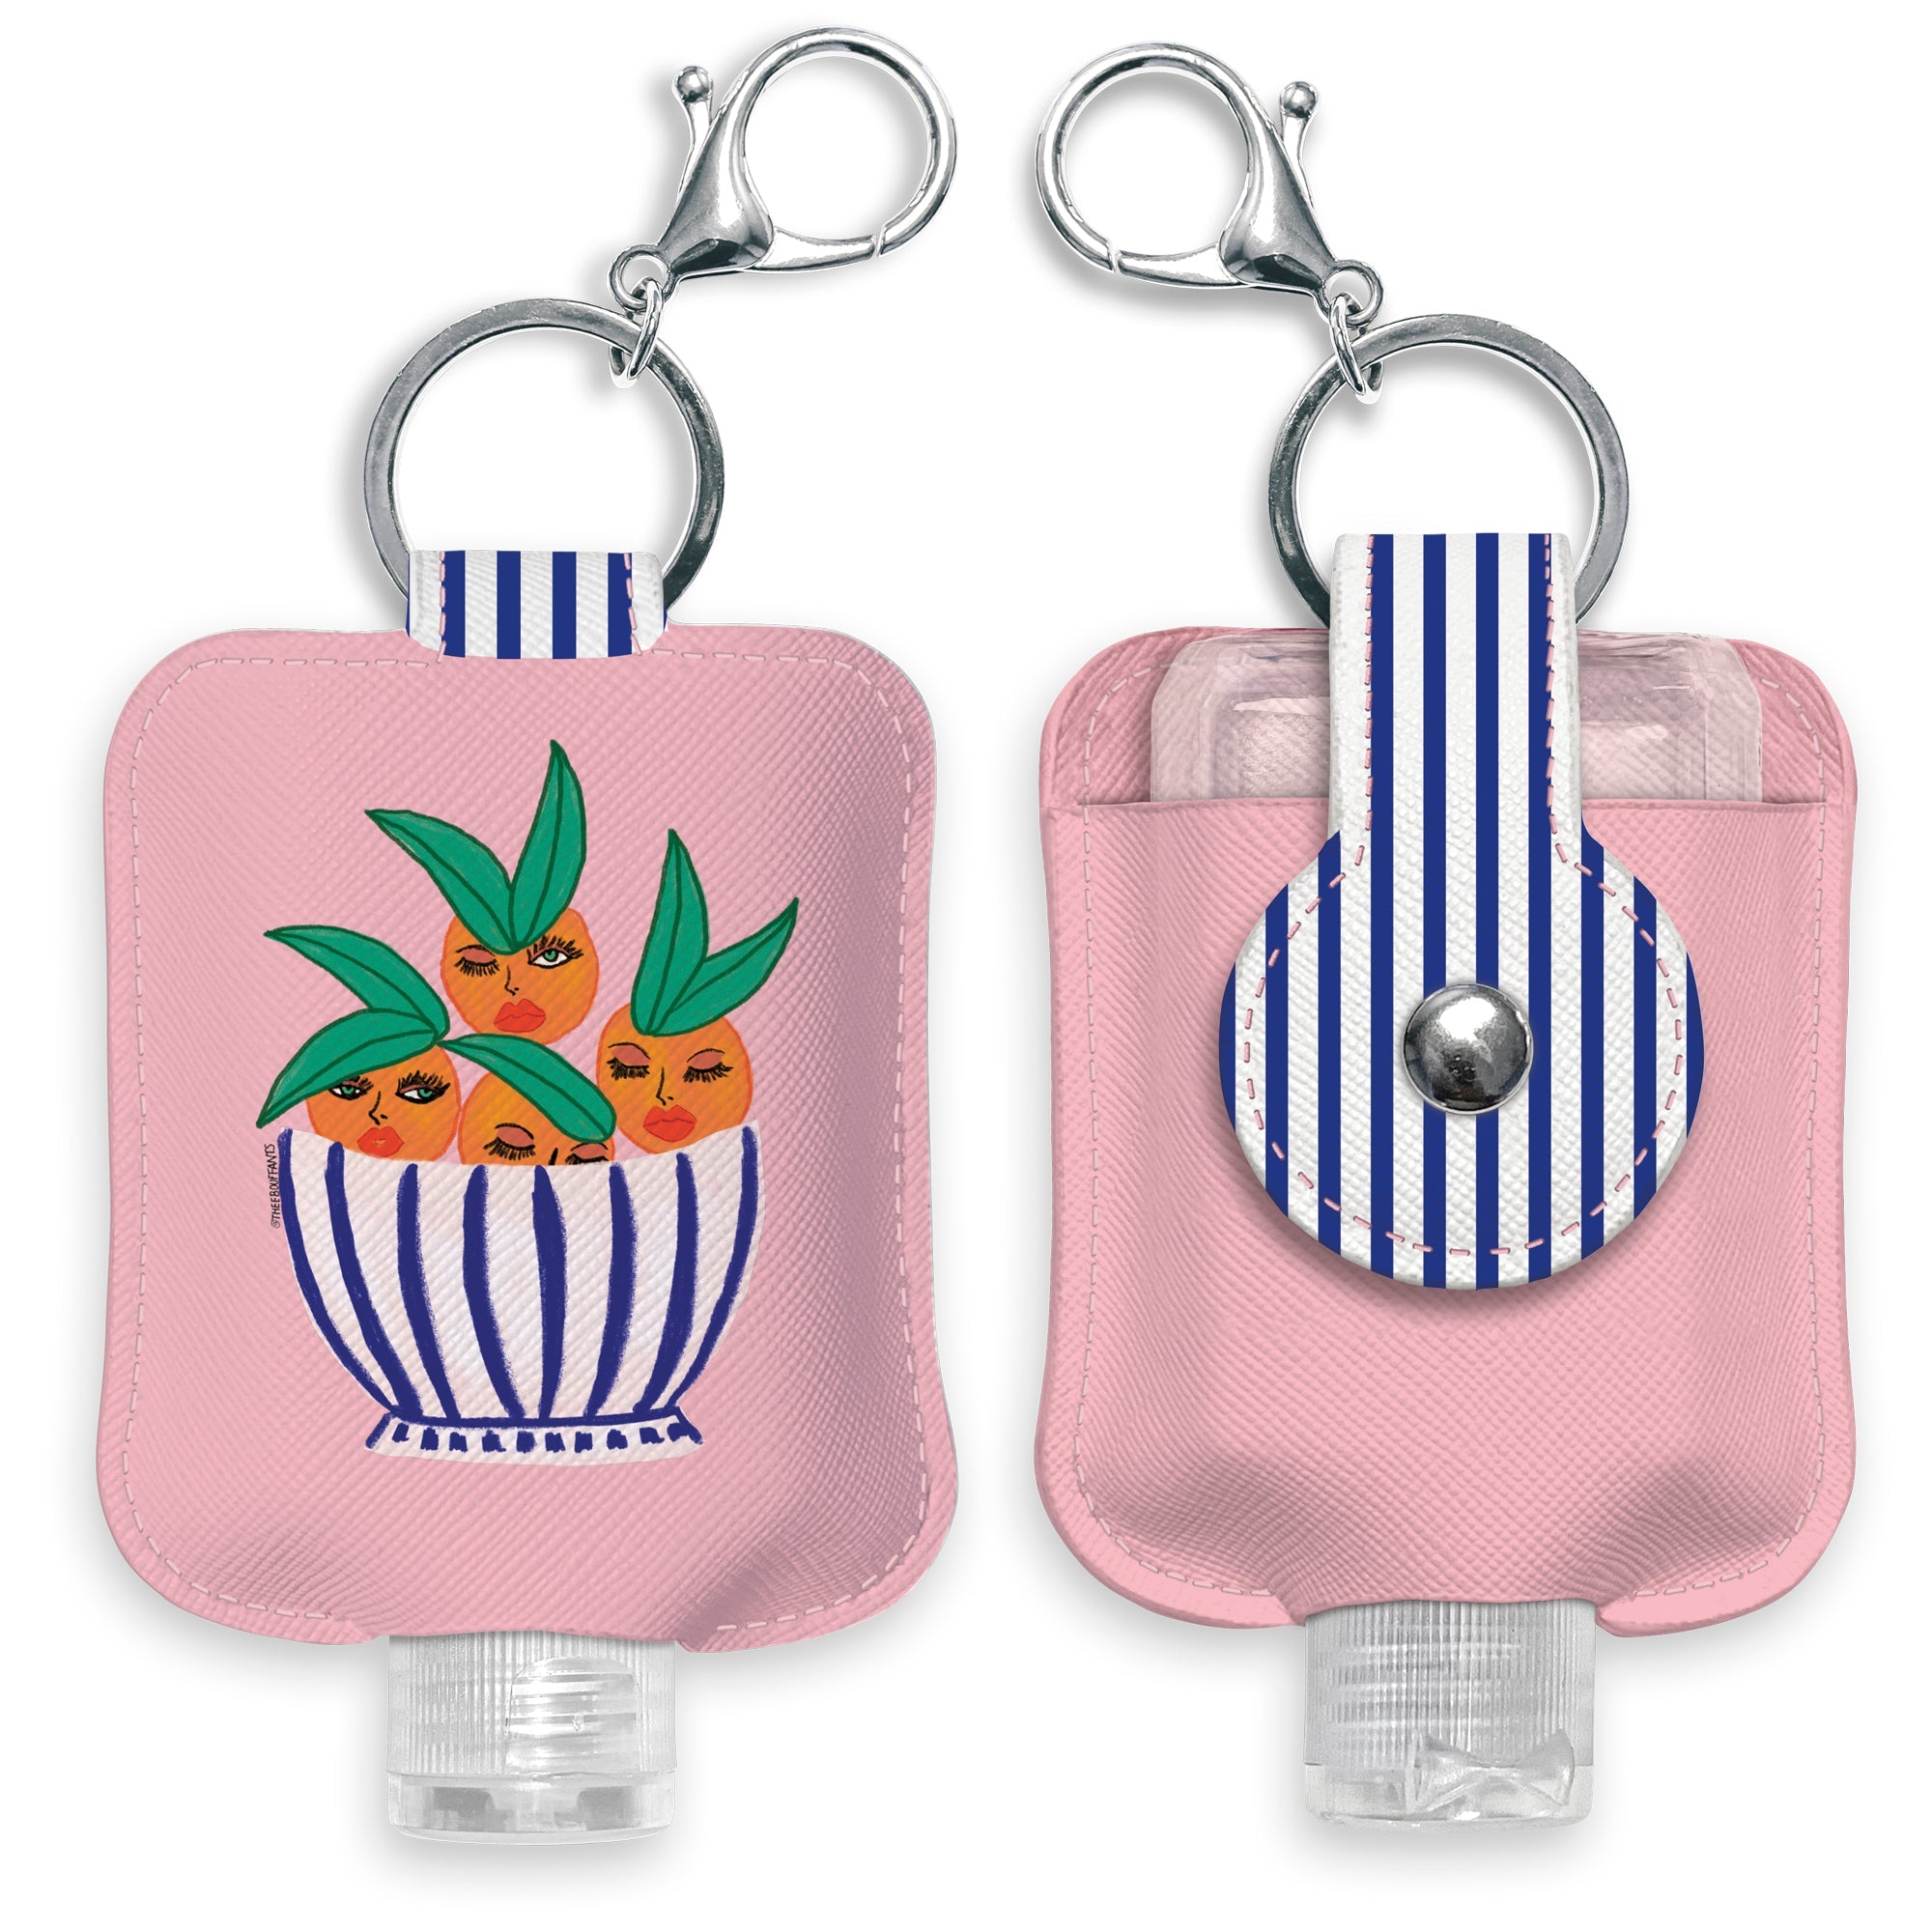 Amazon.com: Hand Sanitizer Holder With Refillable Container - Pink Floral -  2 Ounce Travel Size - Swivel Clip For Backpack, Purse or Keychain -  Handmade by Green Acorn Kitchen : Handmade Products